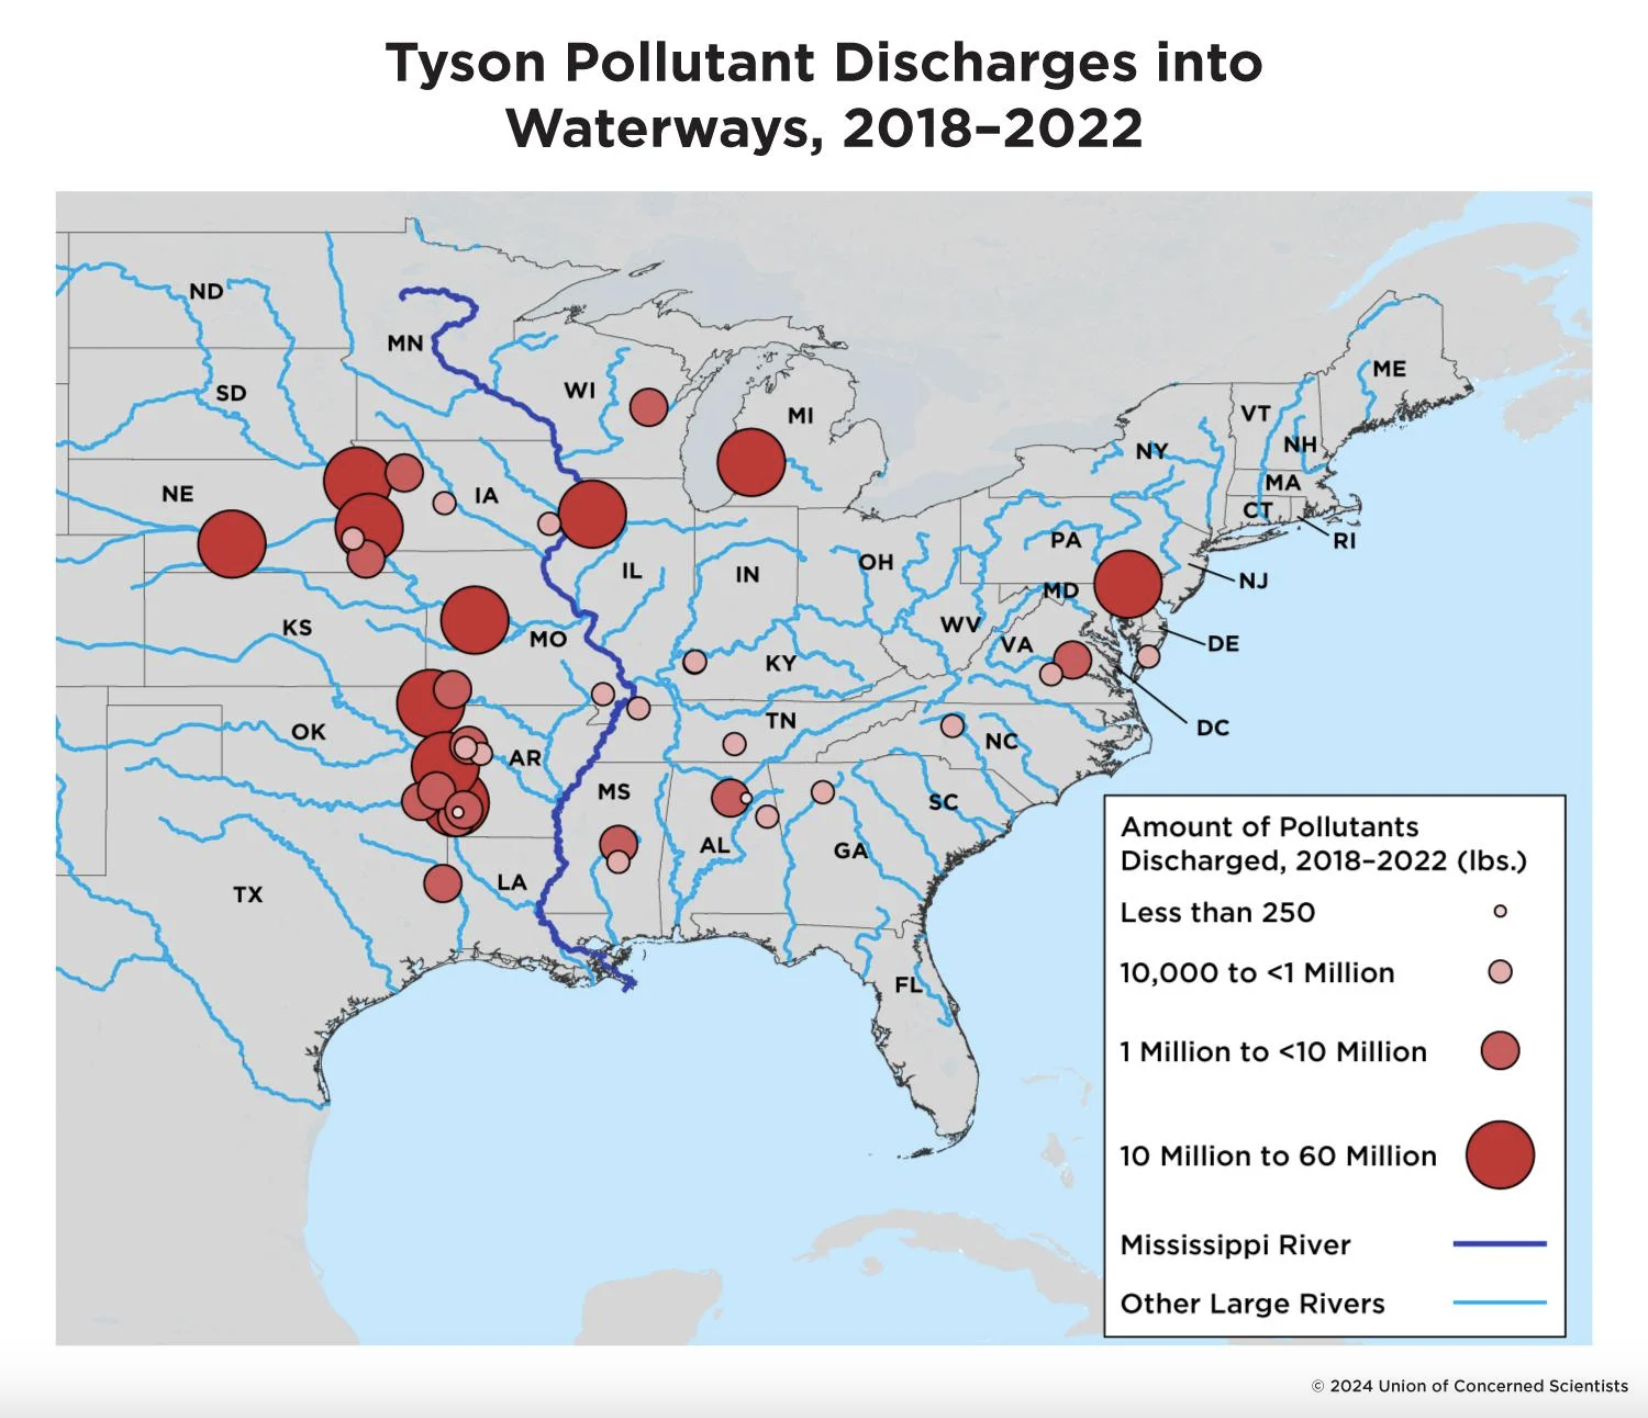 The map shows Tyson meat processing plants by relative pollutant discharges into waterways, 2018-2022.